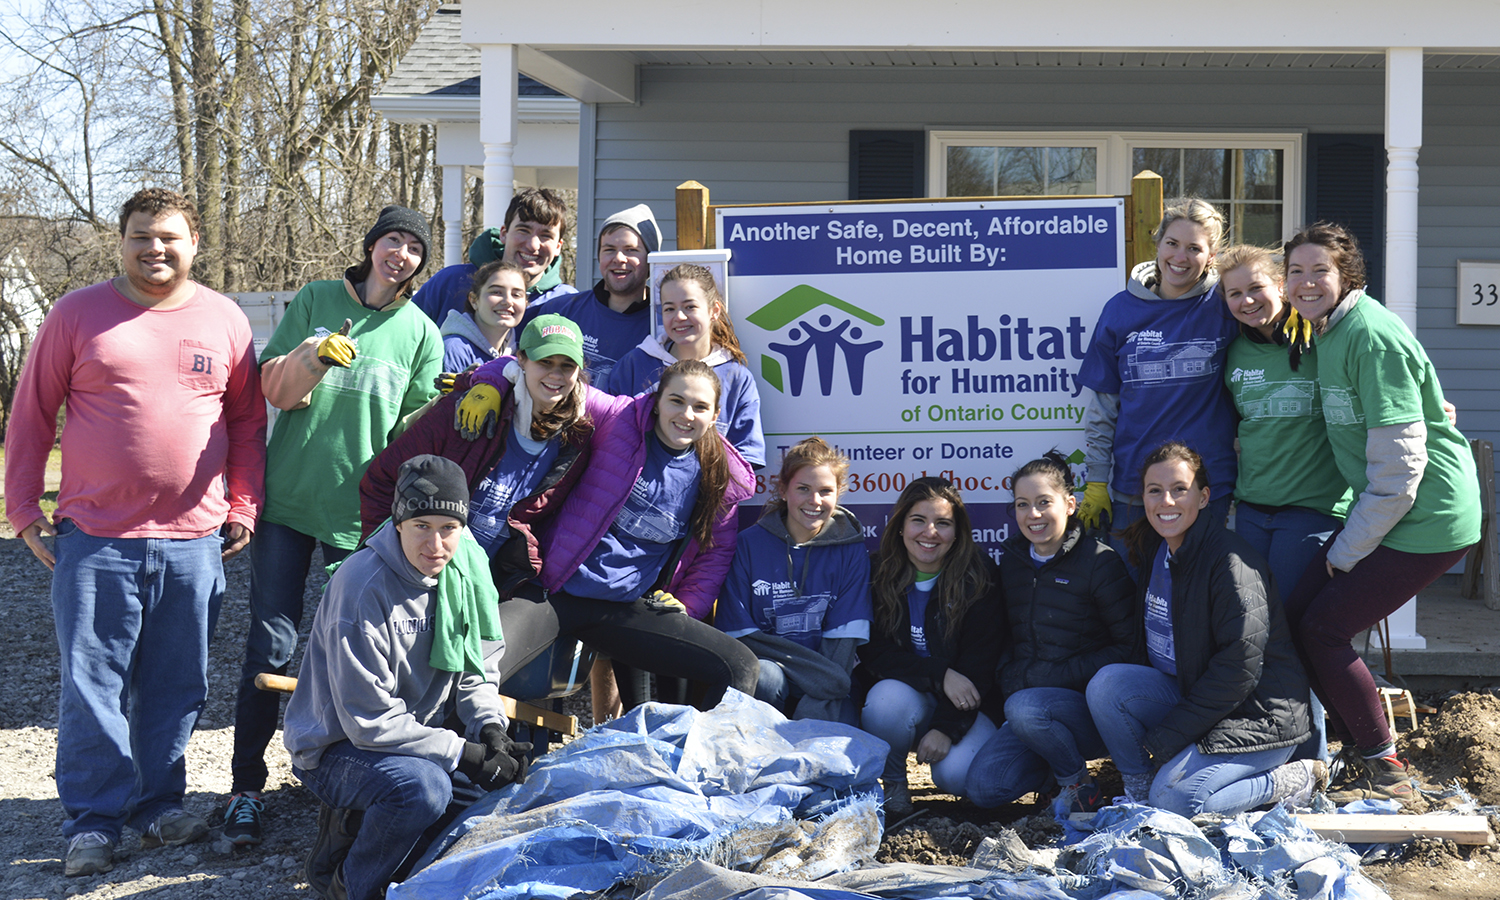 Students on a worksite gather around the Habitat for Humanity sign